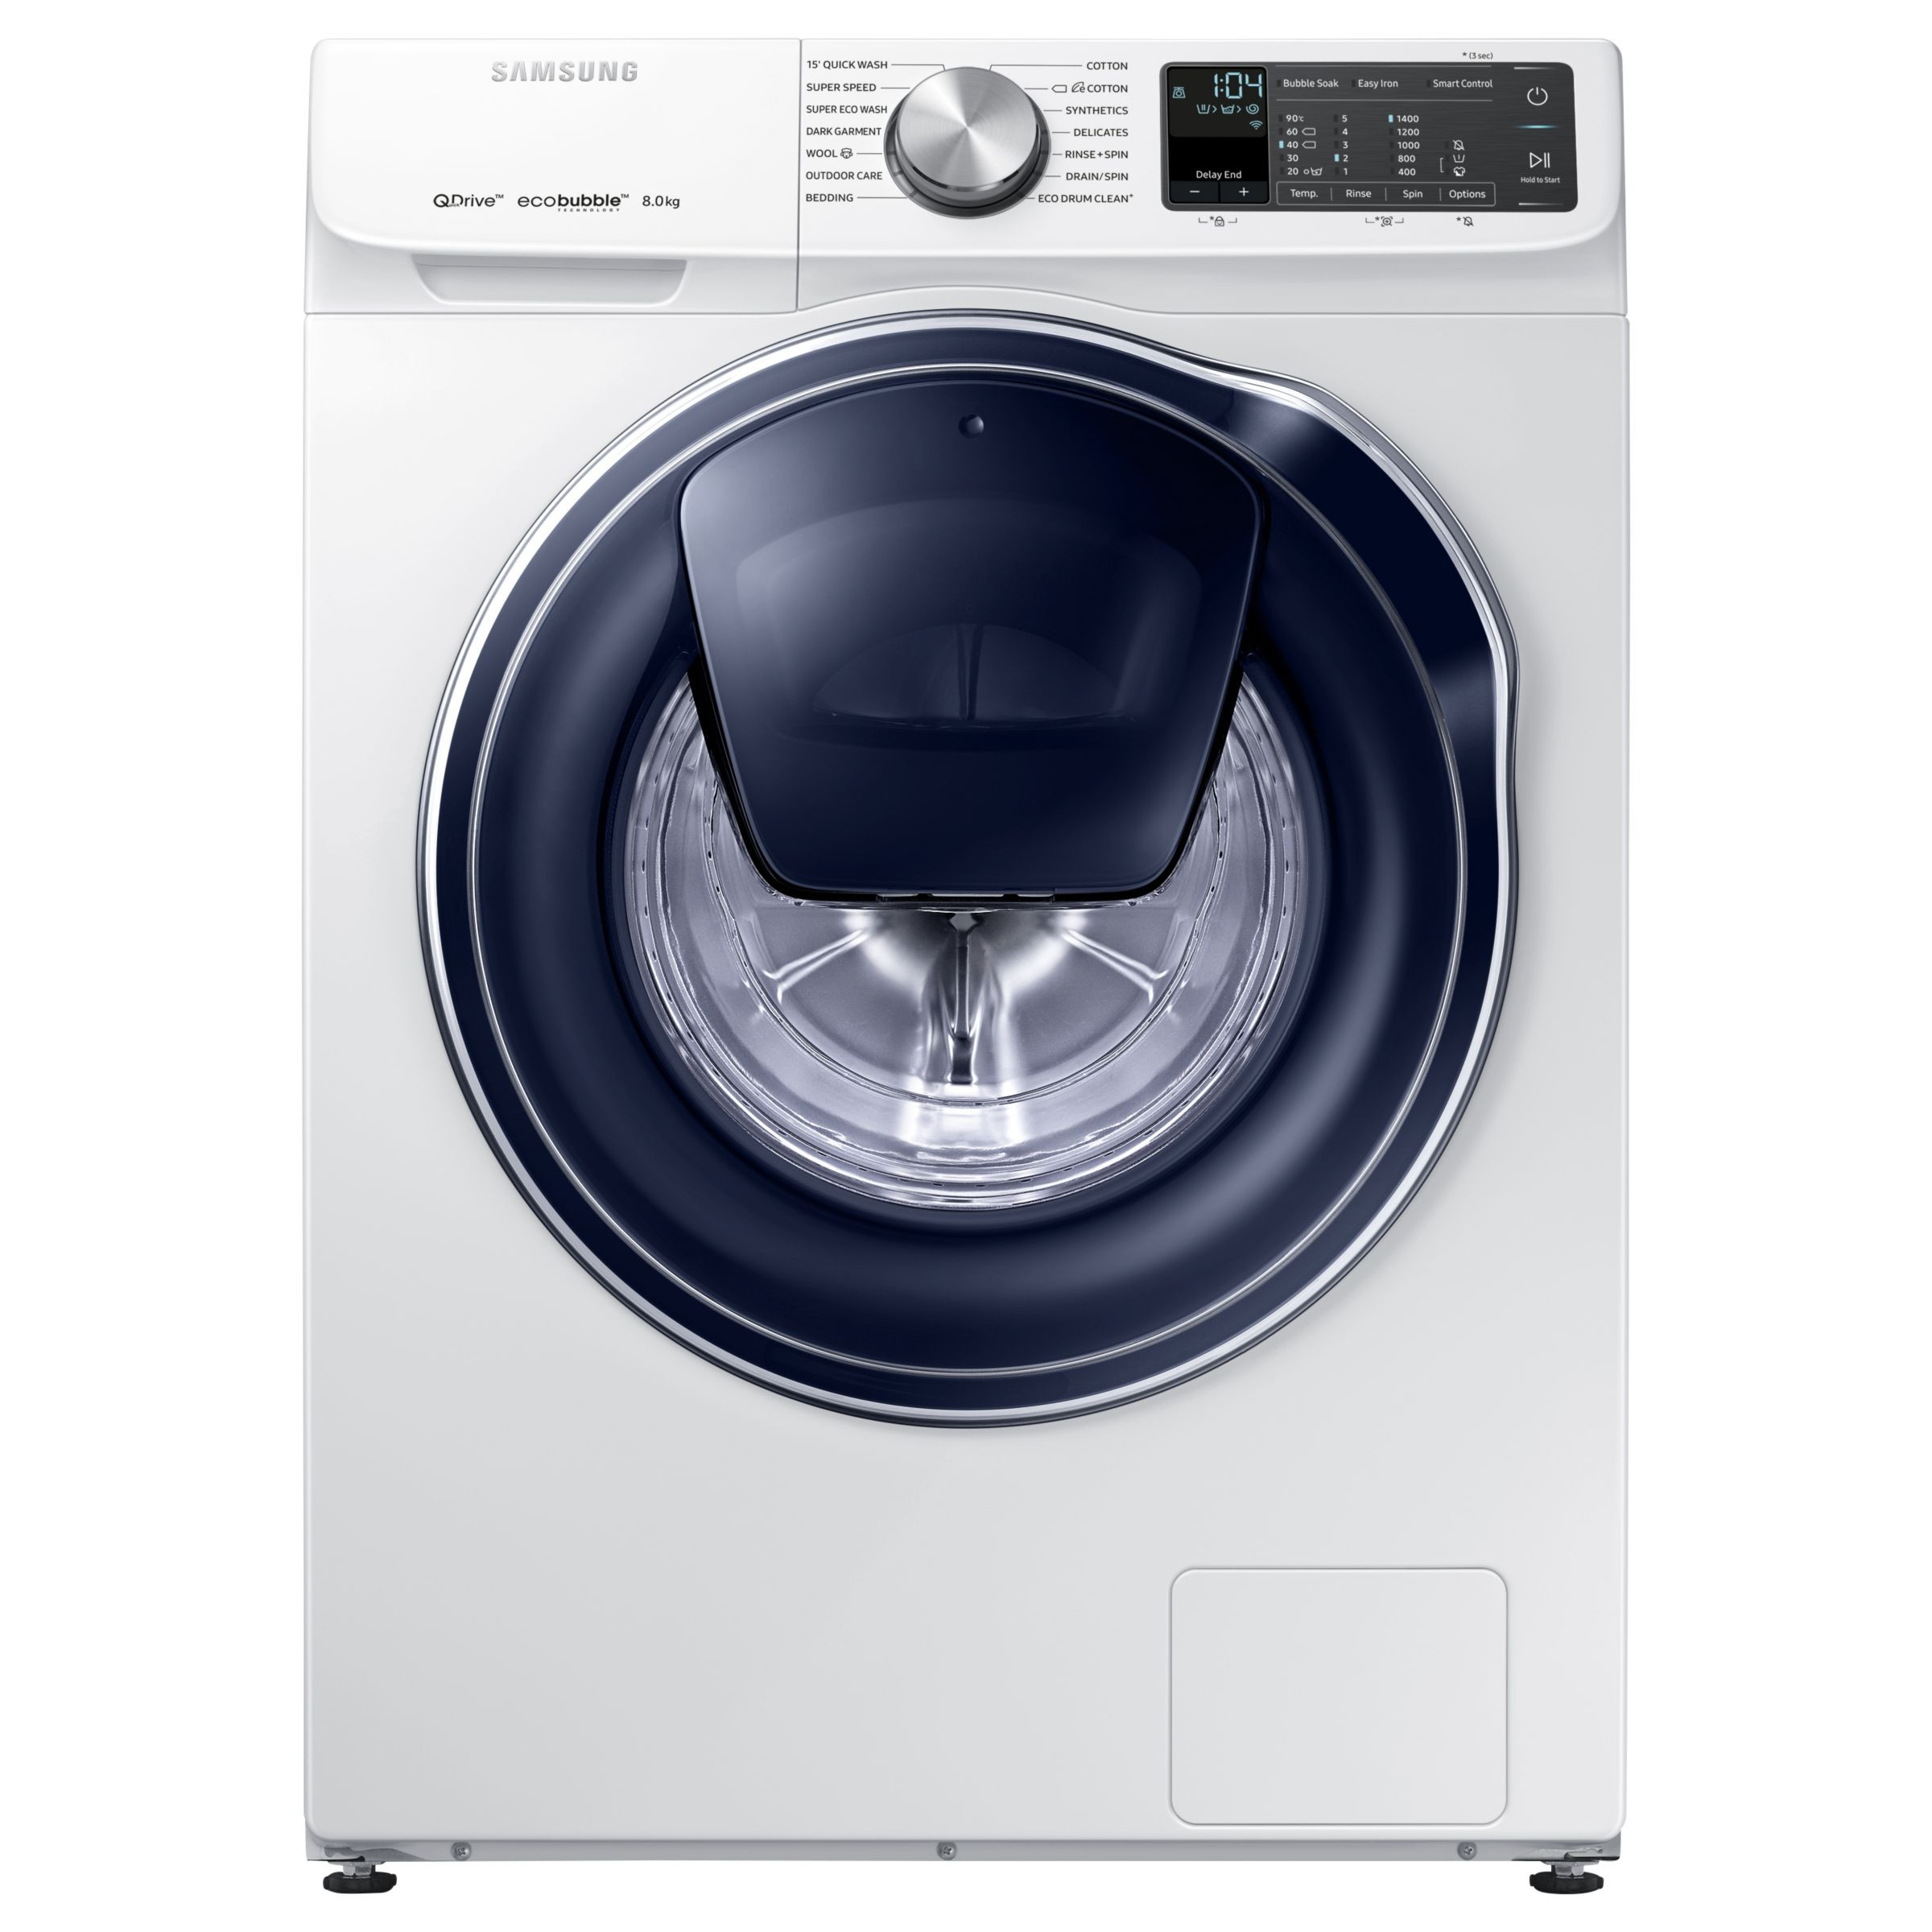 monument vase inserts of samsung quickdrive ww80m645opm eu freestanding washing machine 8kg inside samsung quickdrive ww80m645opm eu freestanding washing machine 8kg load a energy rating 1400rpm spin white at john lewis partners